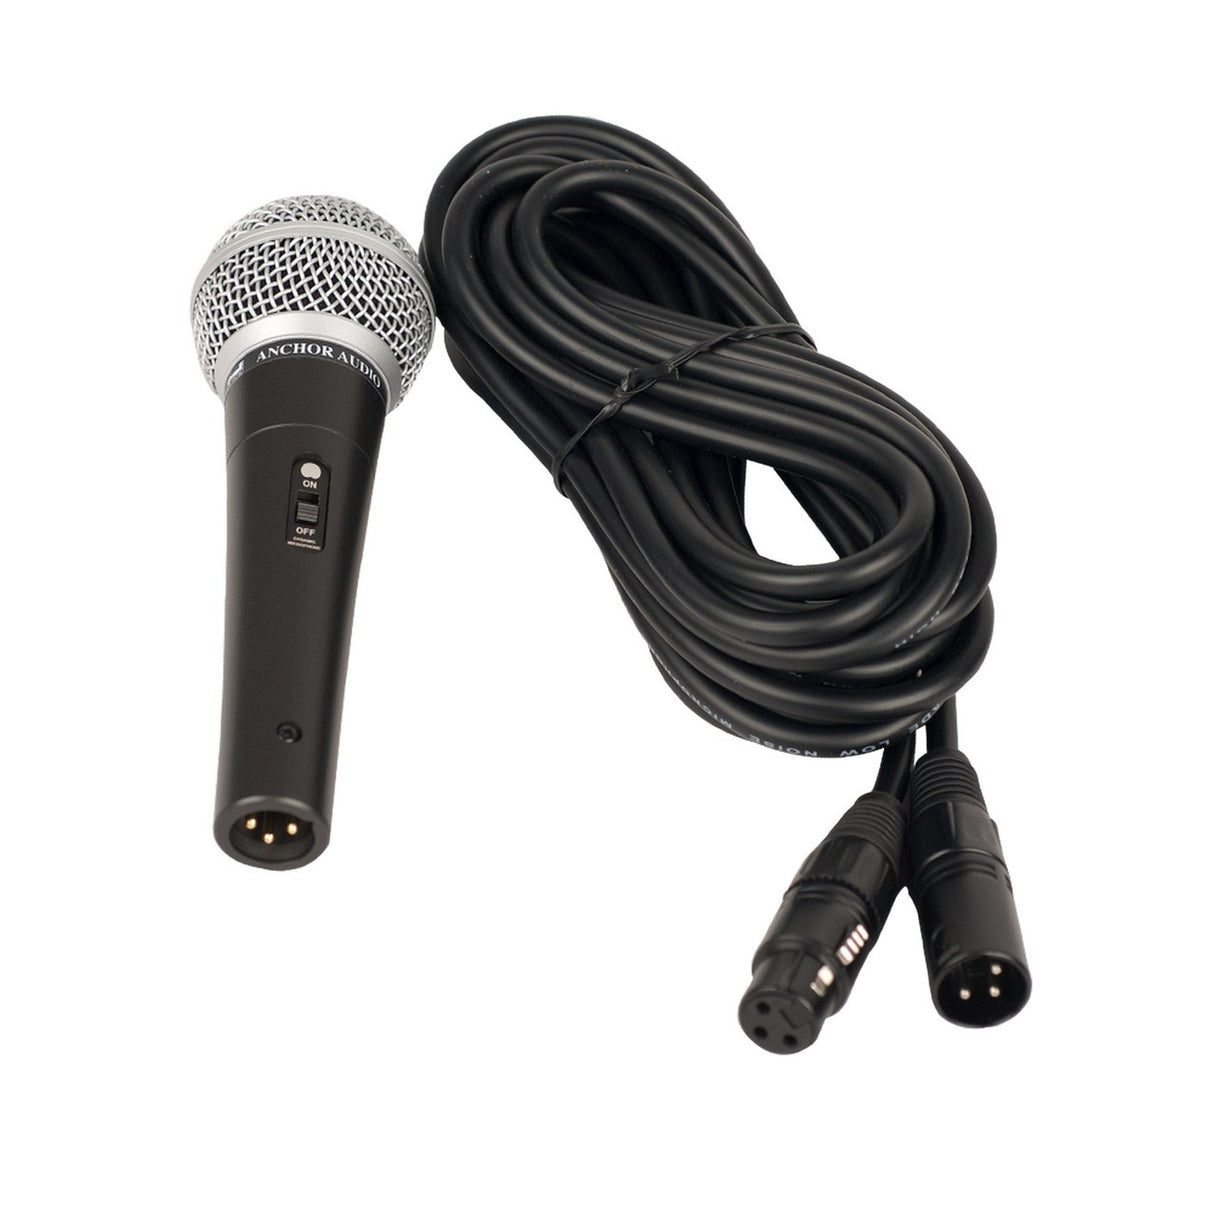 Anchor Audio MIC-90 | Handheld Microphone with XLR Cable